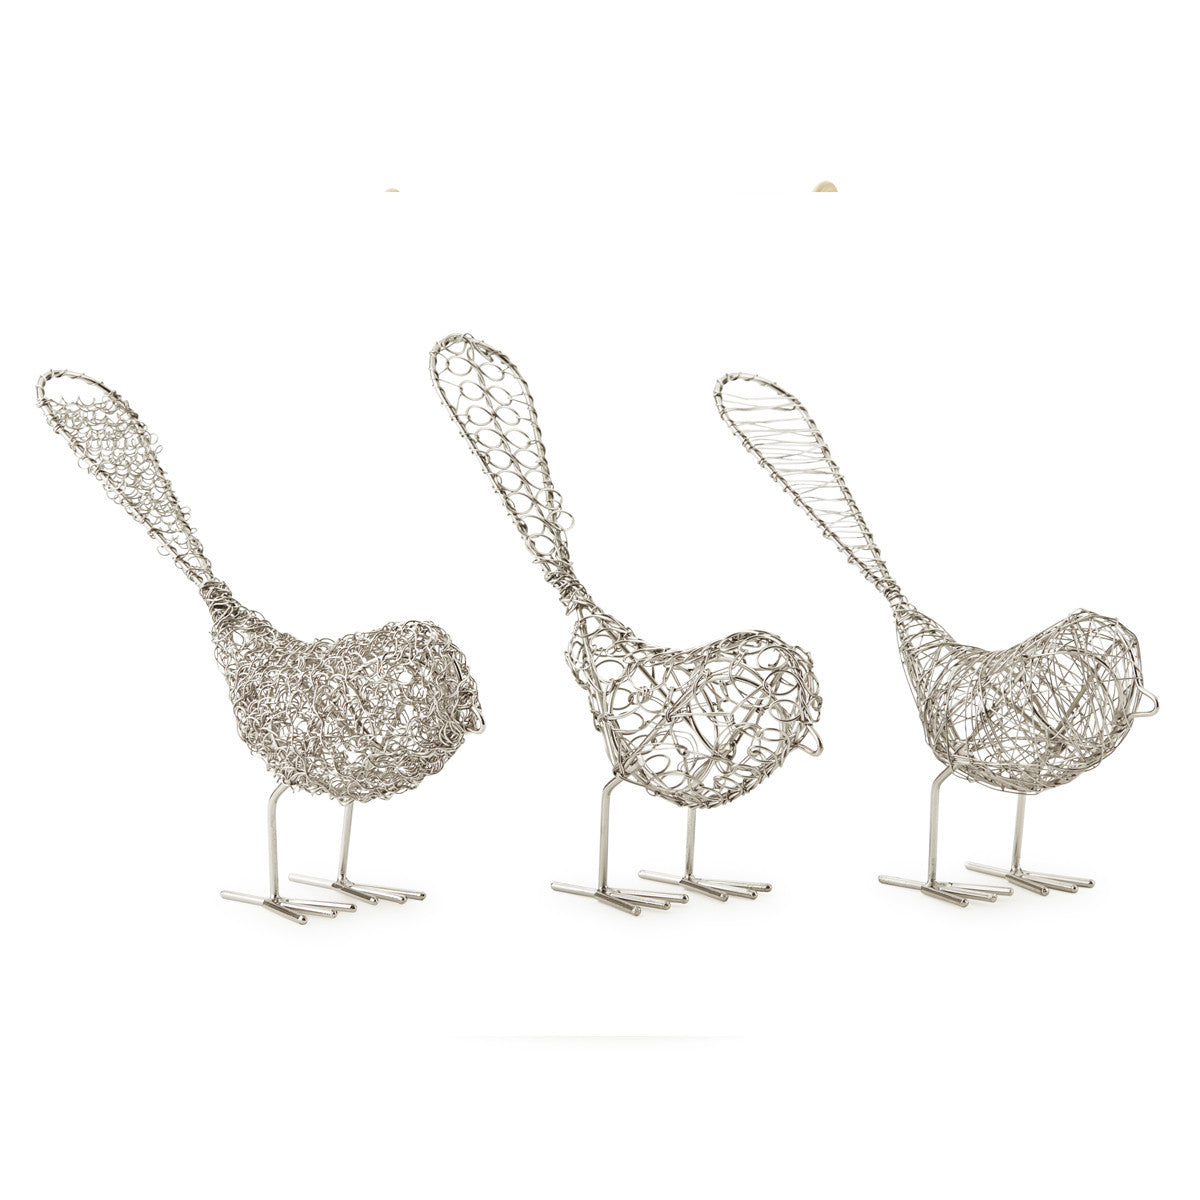 Sculpted Wire Birds - Pack of 3, Assorted